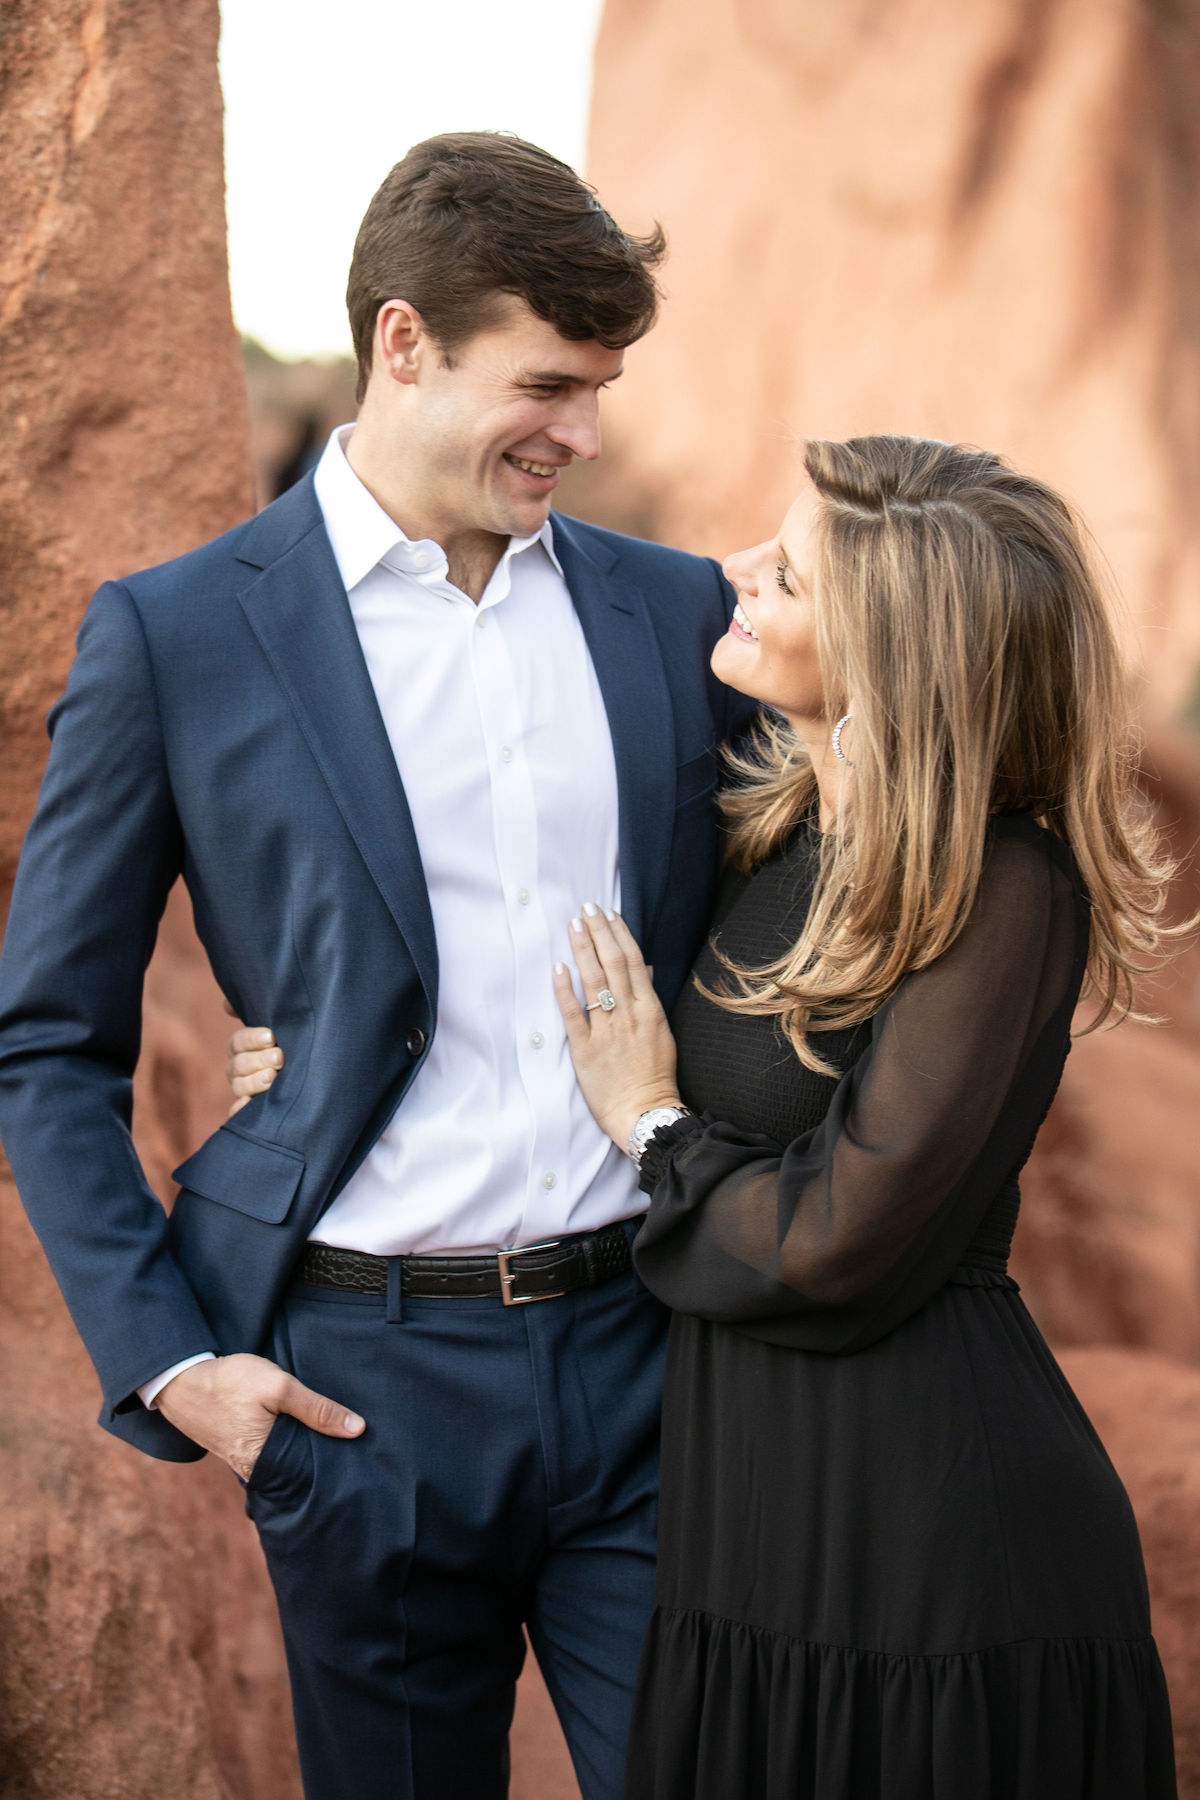 brighton and duncan engagement photos, garden of the gods engagement photo shoot, what to wear for engagement photos, Colorado engagement photos